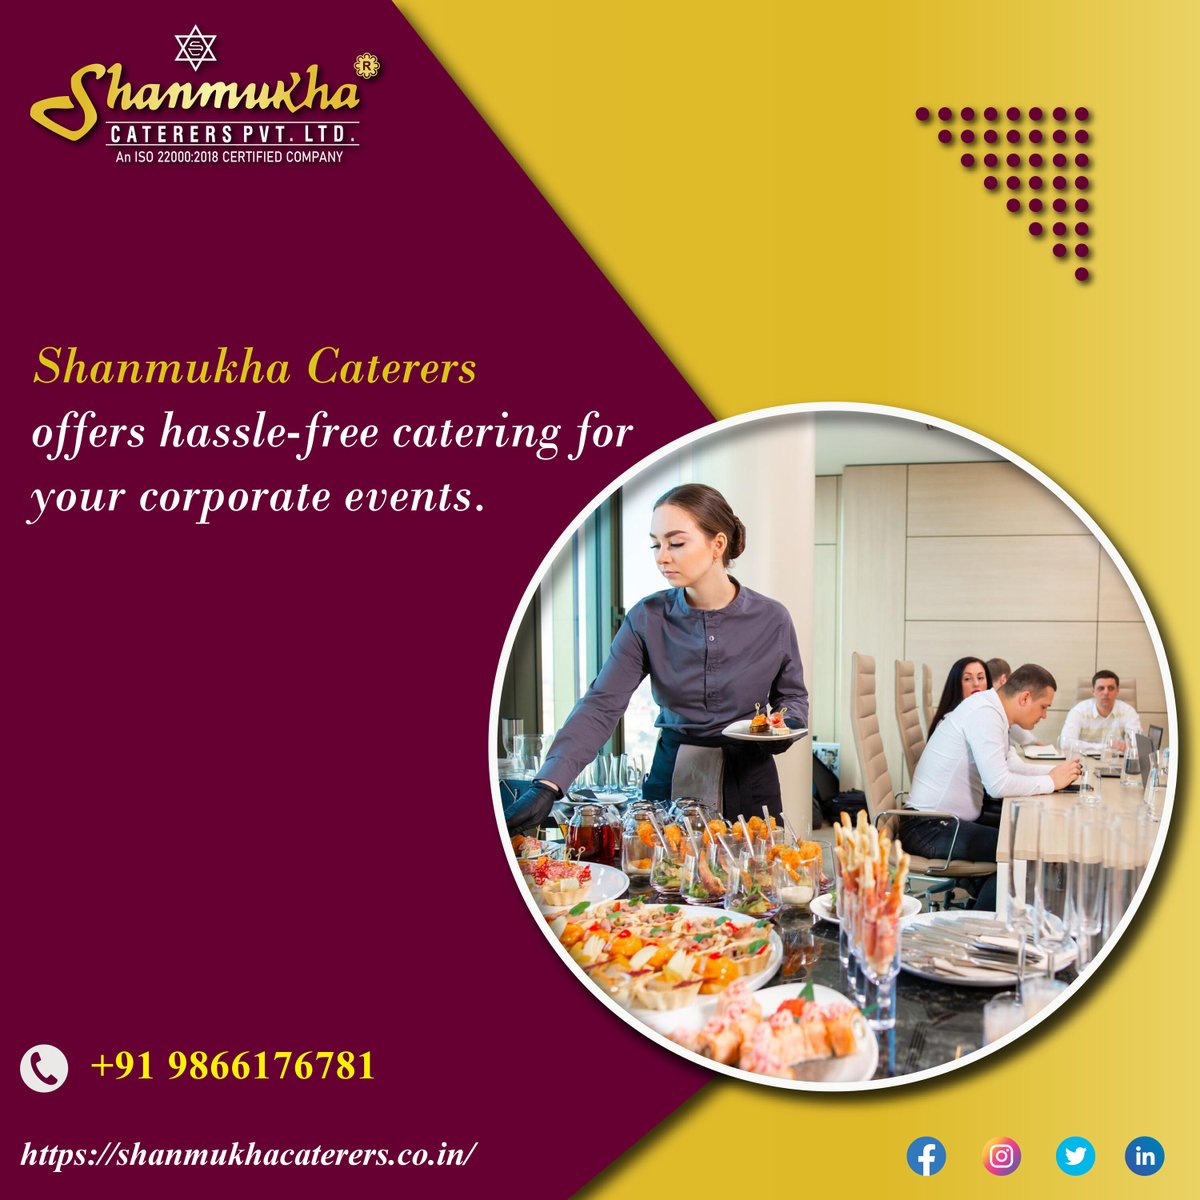 Hassle-free catering experience for your corporate event with Shanmukha Caterers.

Contact Us: +91 9866176781

Website: shanmukhacaterers.co.in

#ShanmukhaCaterers #foodevent #hasslefreeservice #corporate #catering